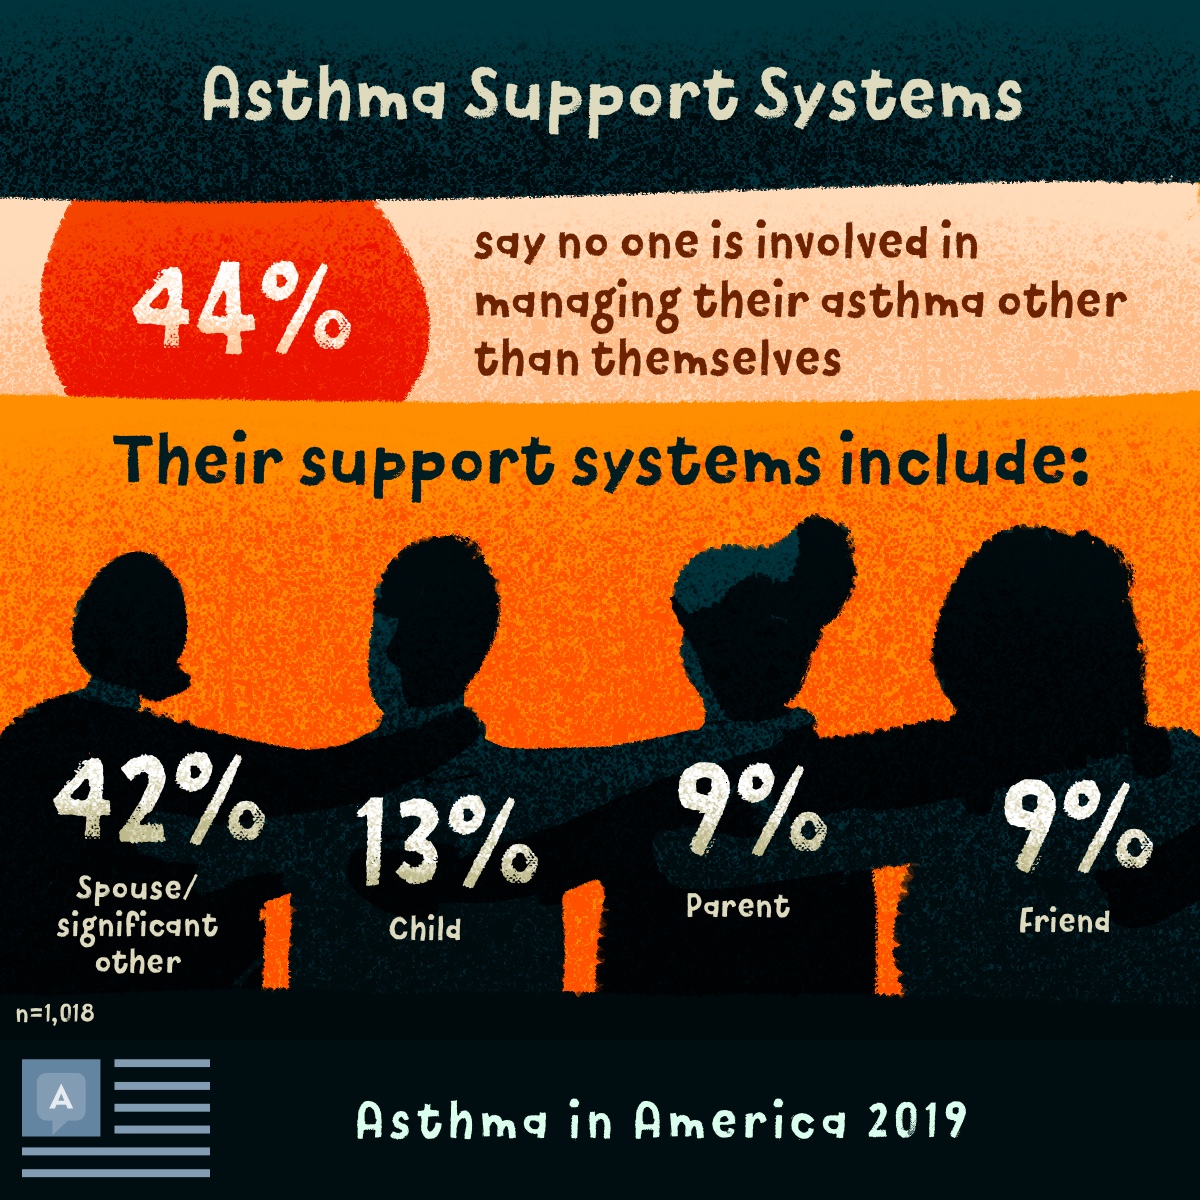 Our survey asked about asthma support systems. 44% said no one is involved in managing their asthma other than themselves.